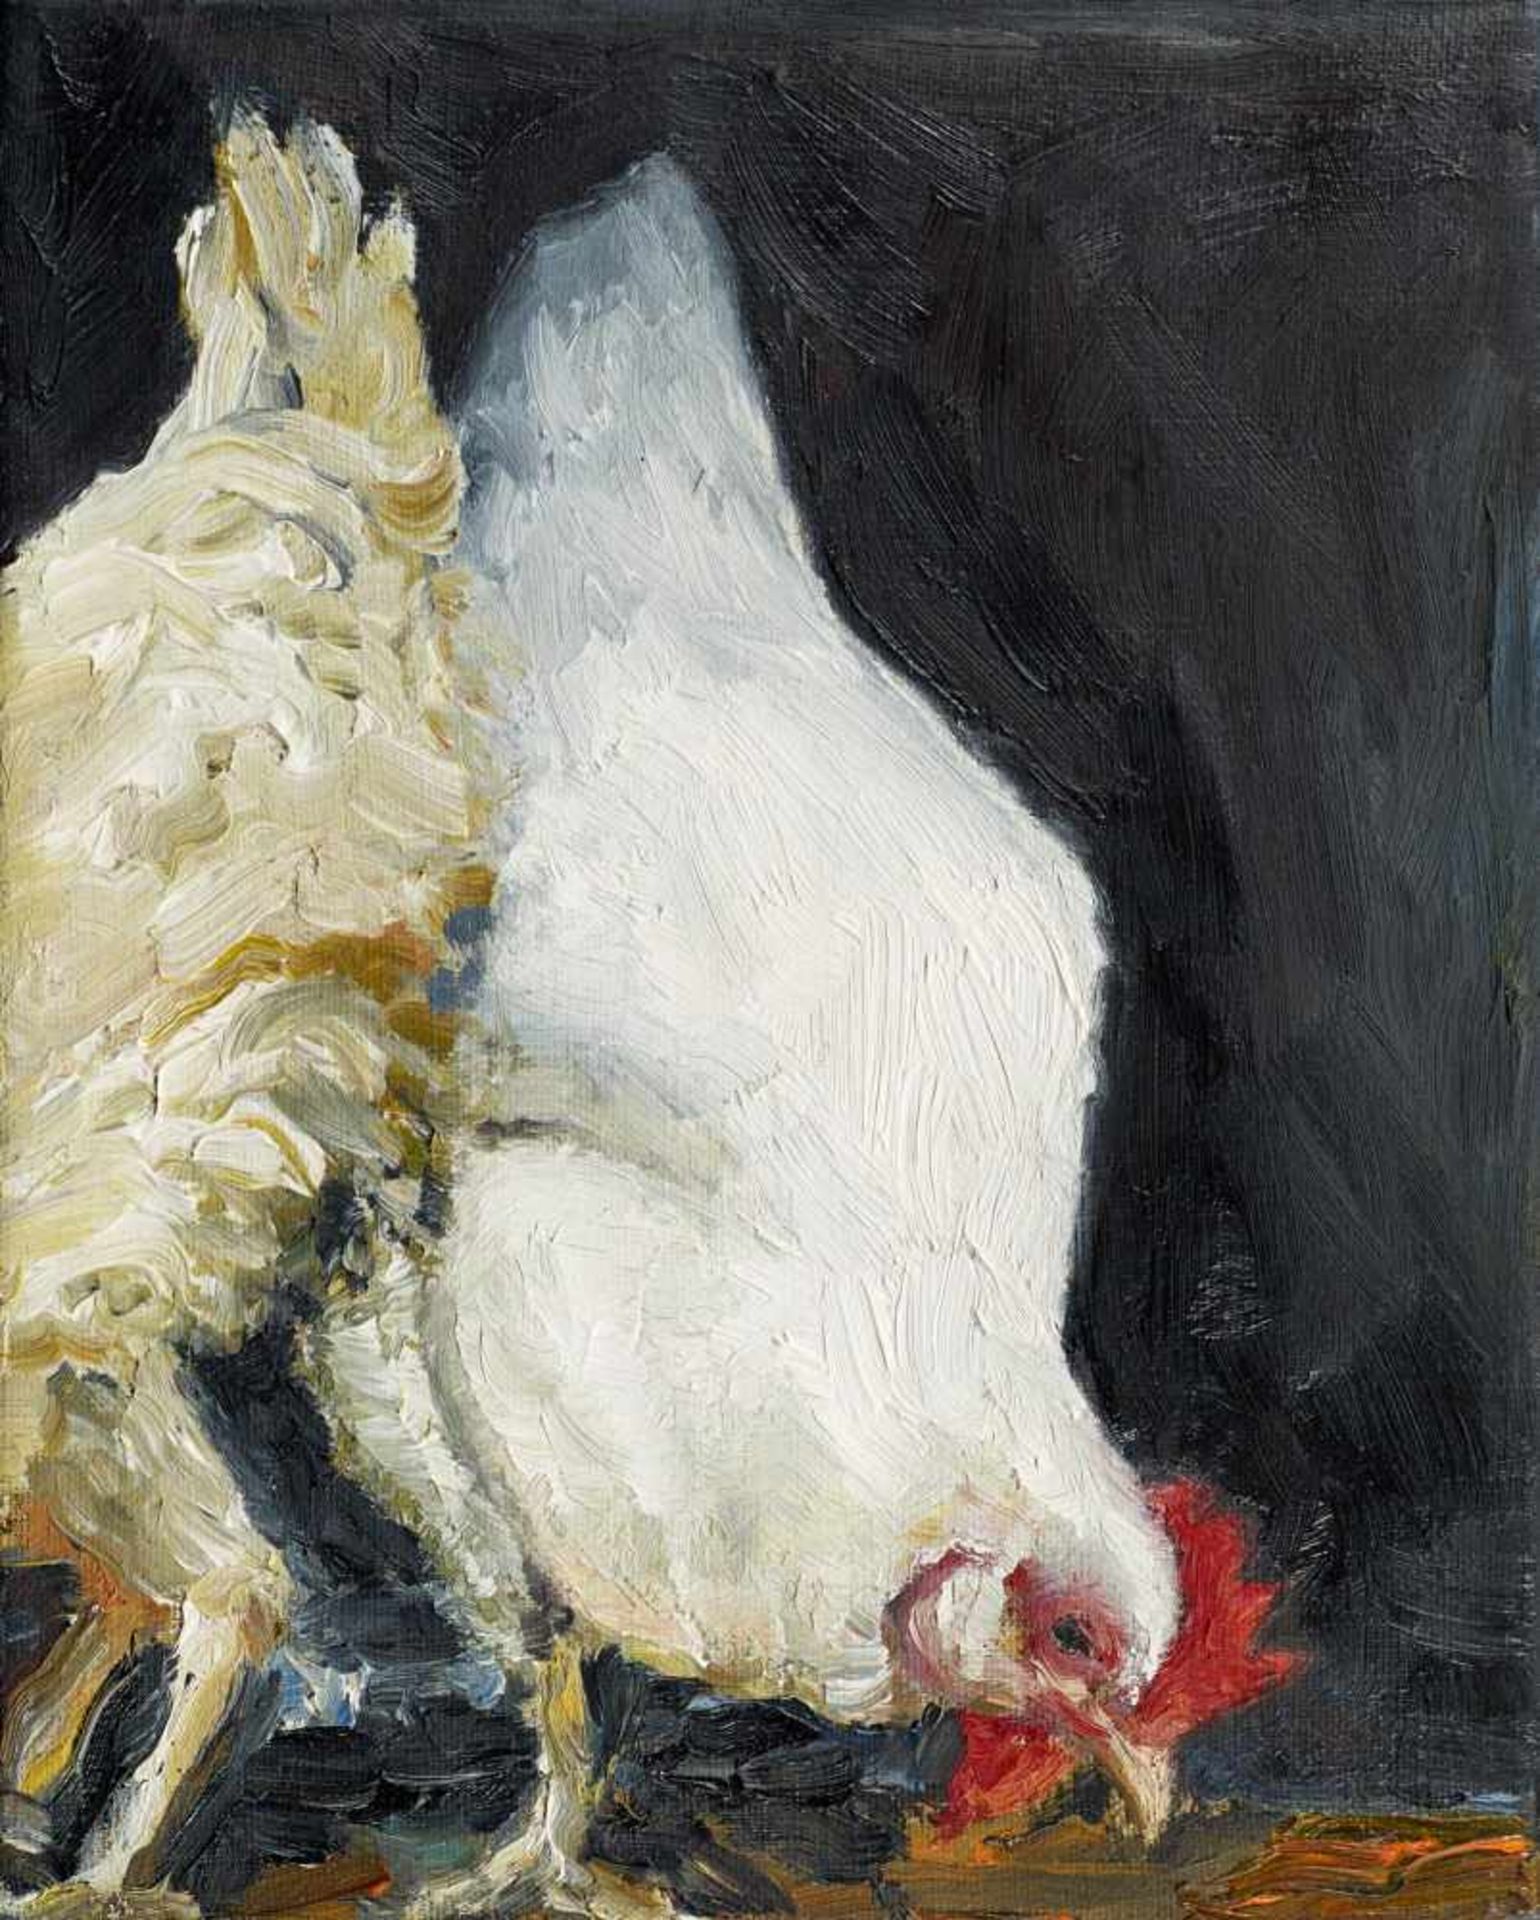 Kneffel, Karin1957 MarlUntitled (Chickens). 1986. Oil on canvas. 30 x 24cm. Dated and signed verso